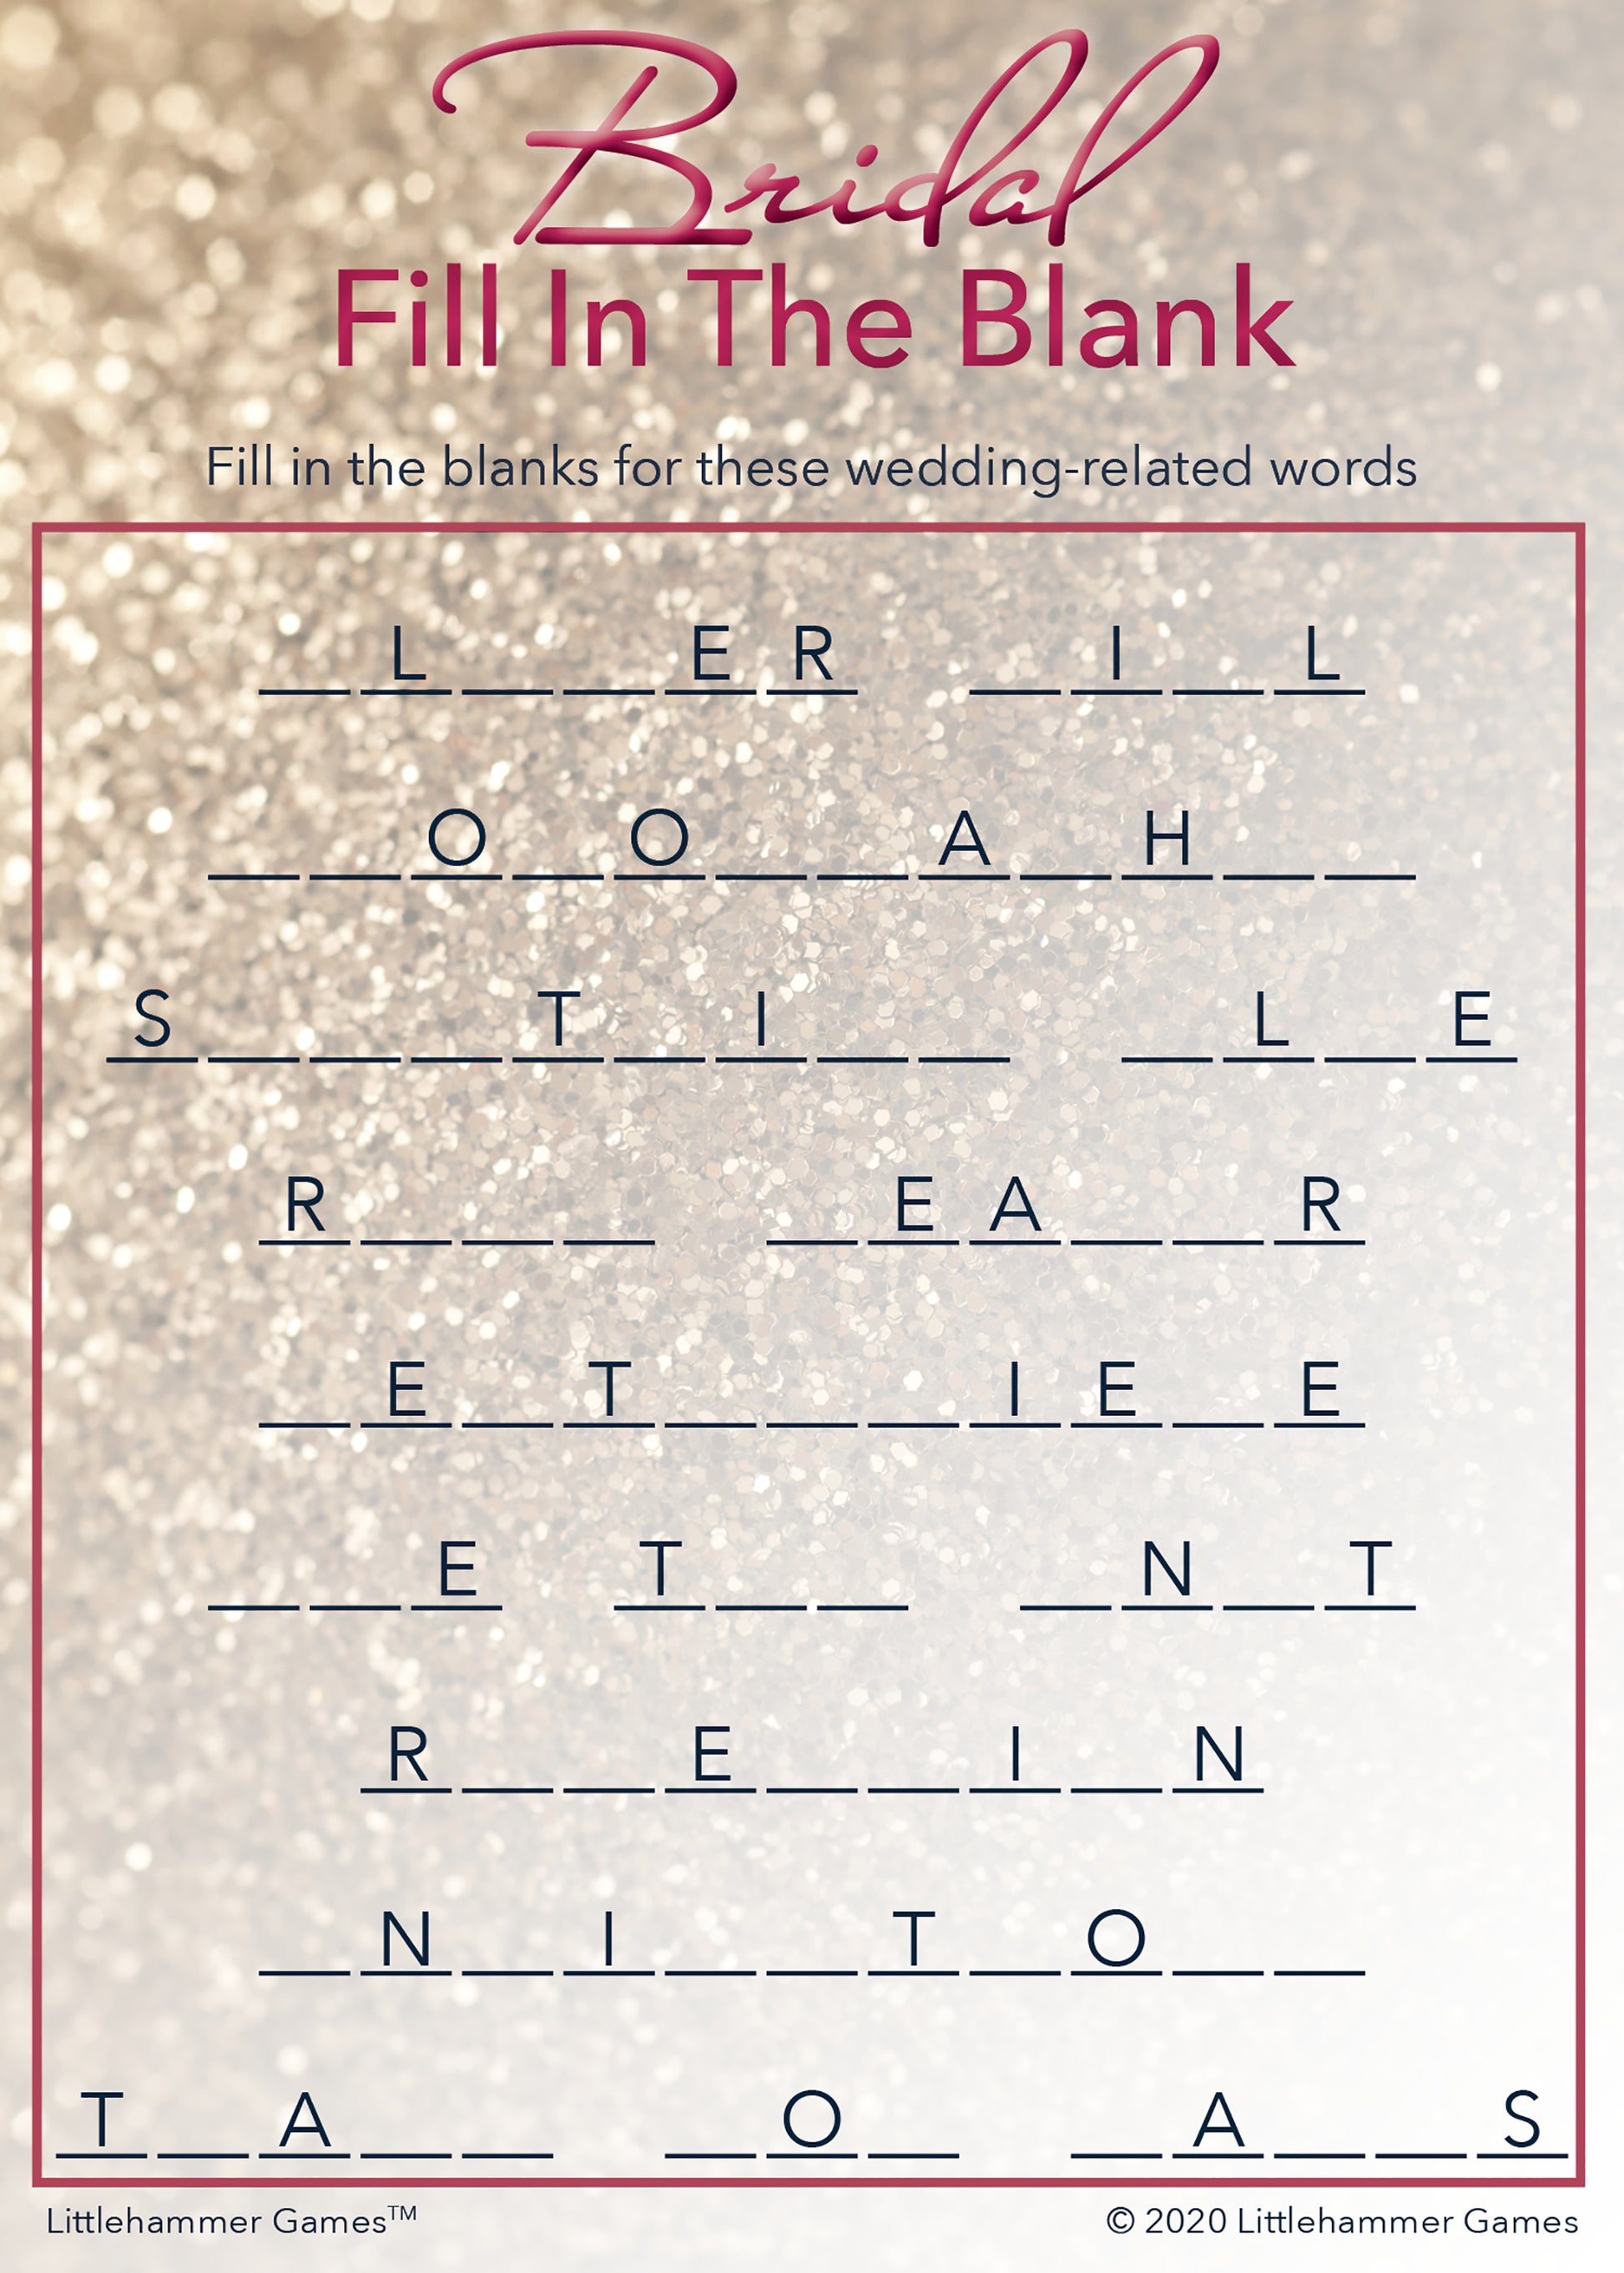 Bridal Fill in the Blank game card with a glittery rose gold background